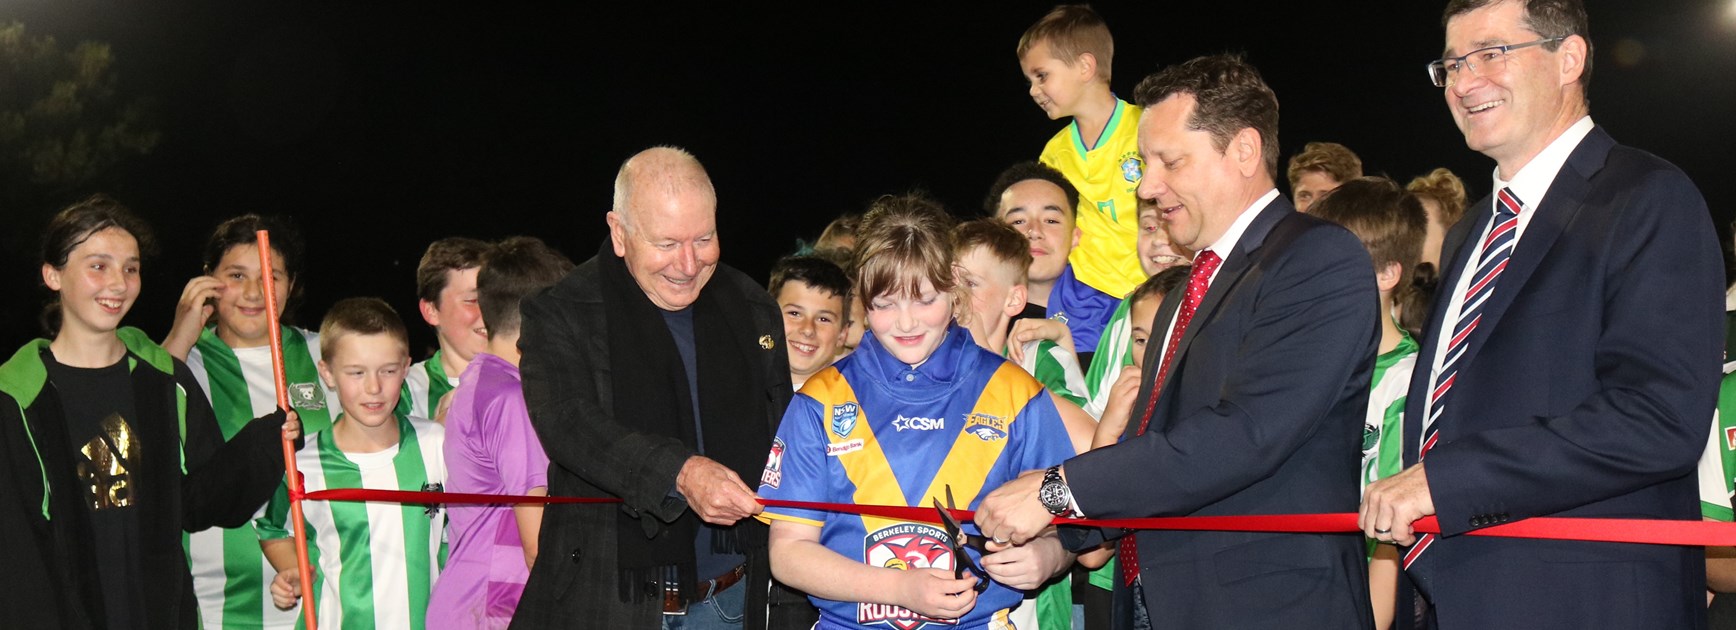 Easts Group Support a Brighter Future at Berkeley Oval